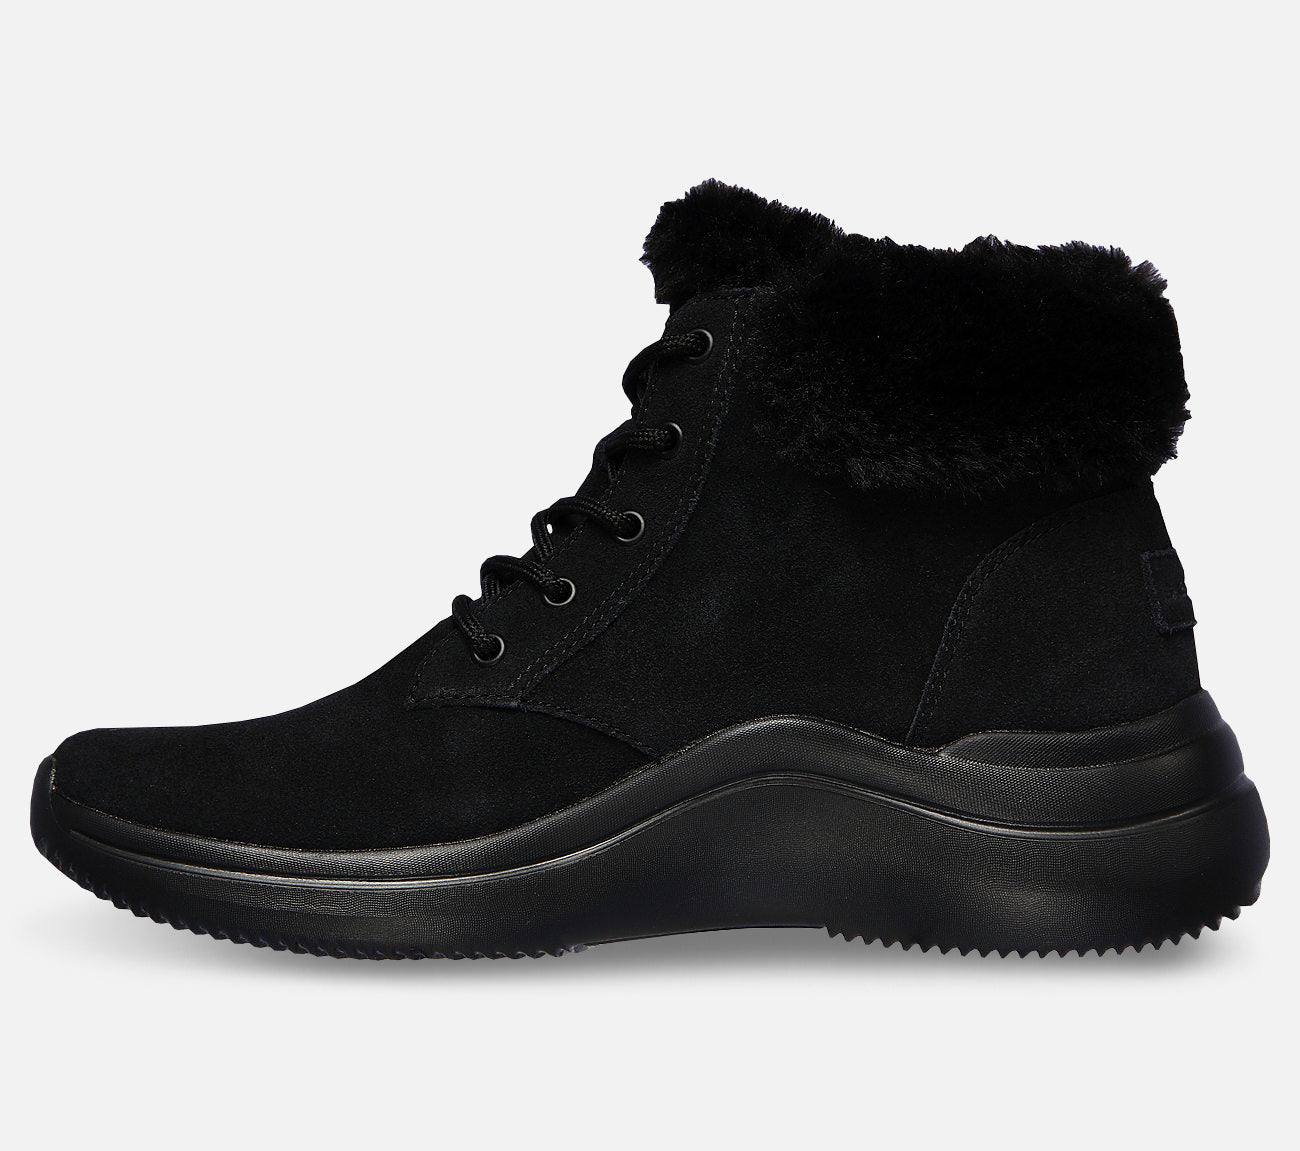 On-The-Go Midtown - Goodnatured Boot Skechers